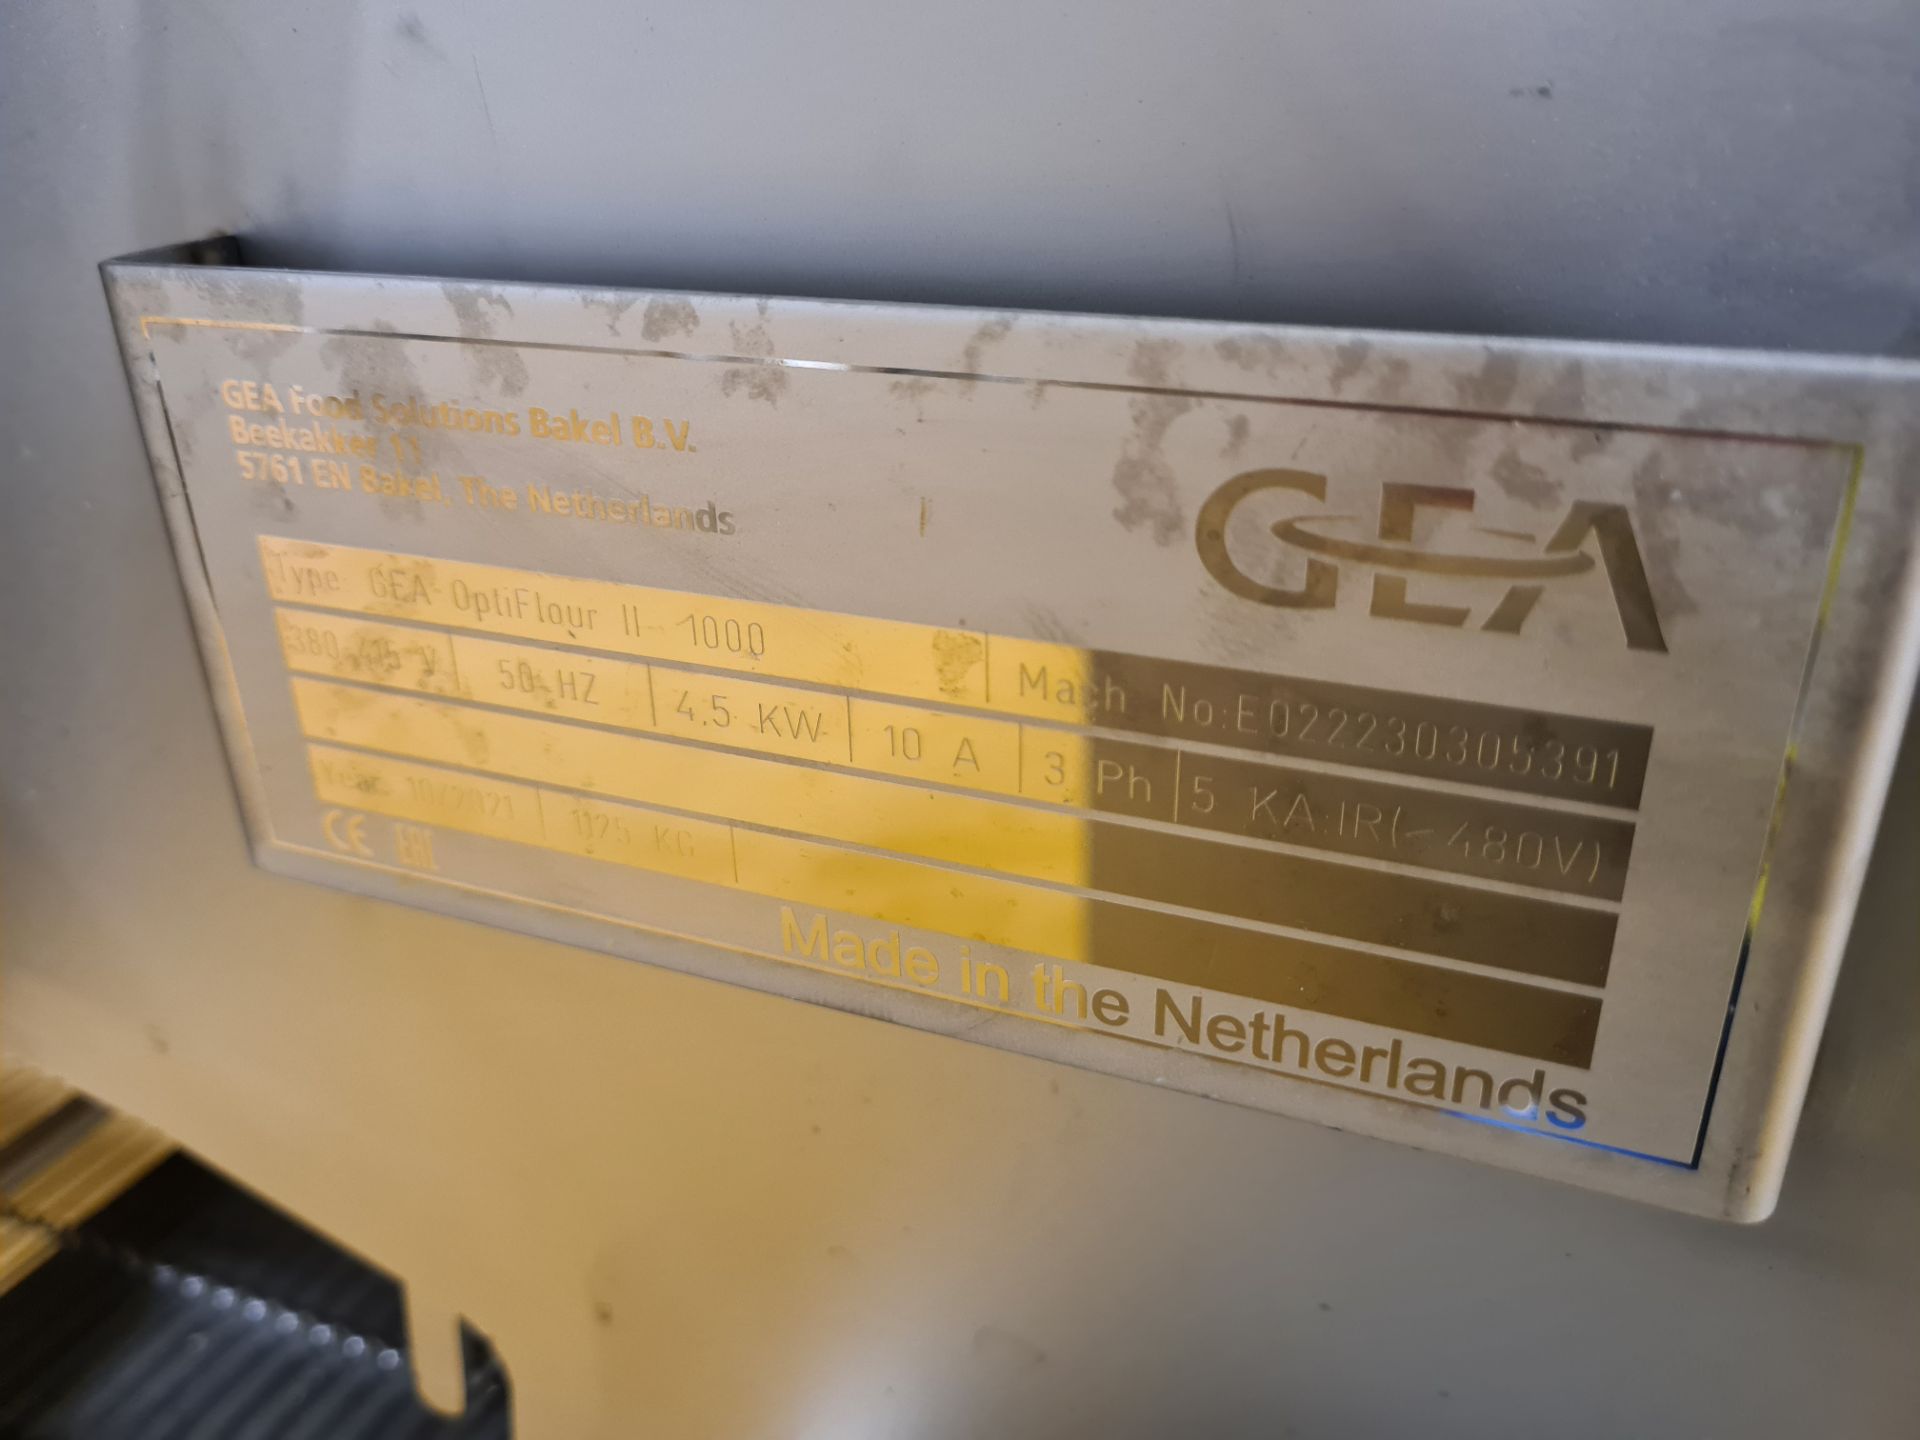 GEA OPTIFLOUR II 1000 DUSTER, serial no. E022230305391, year of manufacture 2021 (VOM373)Please read - Image 6 of 6